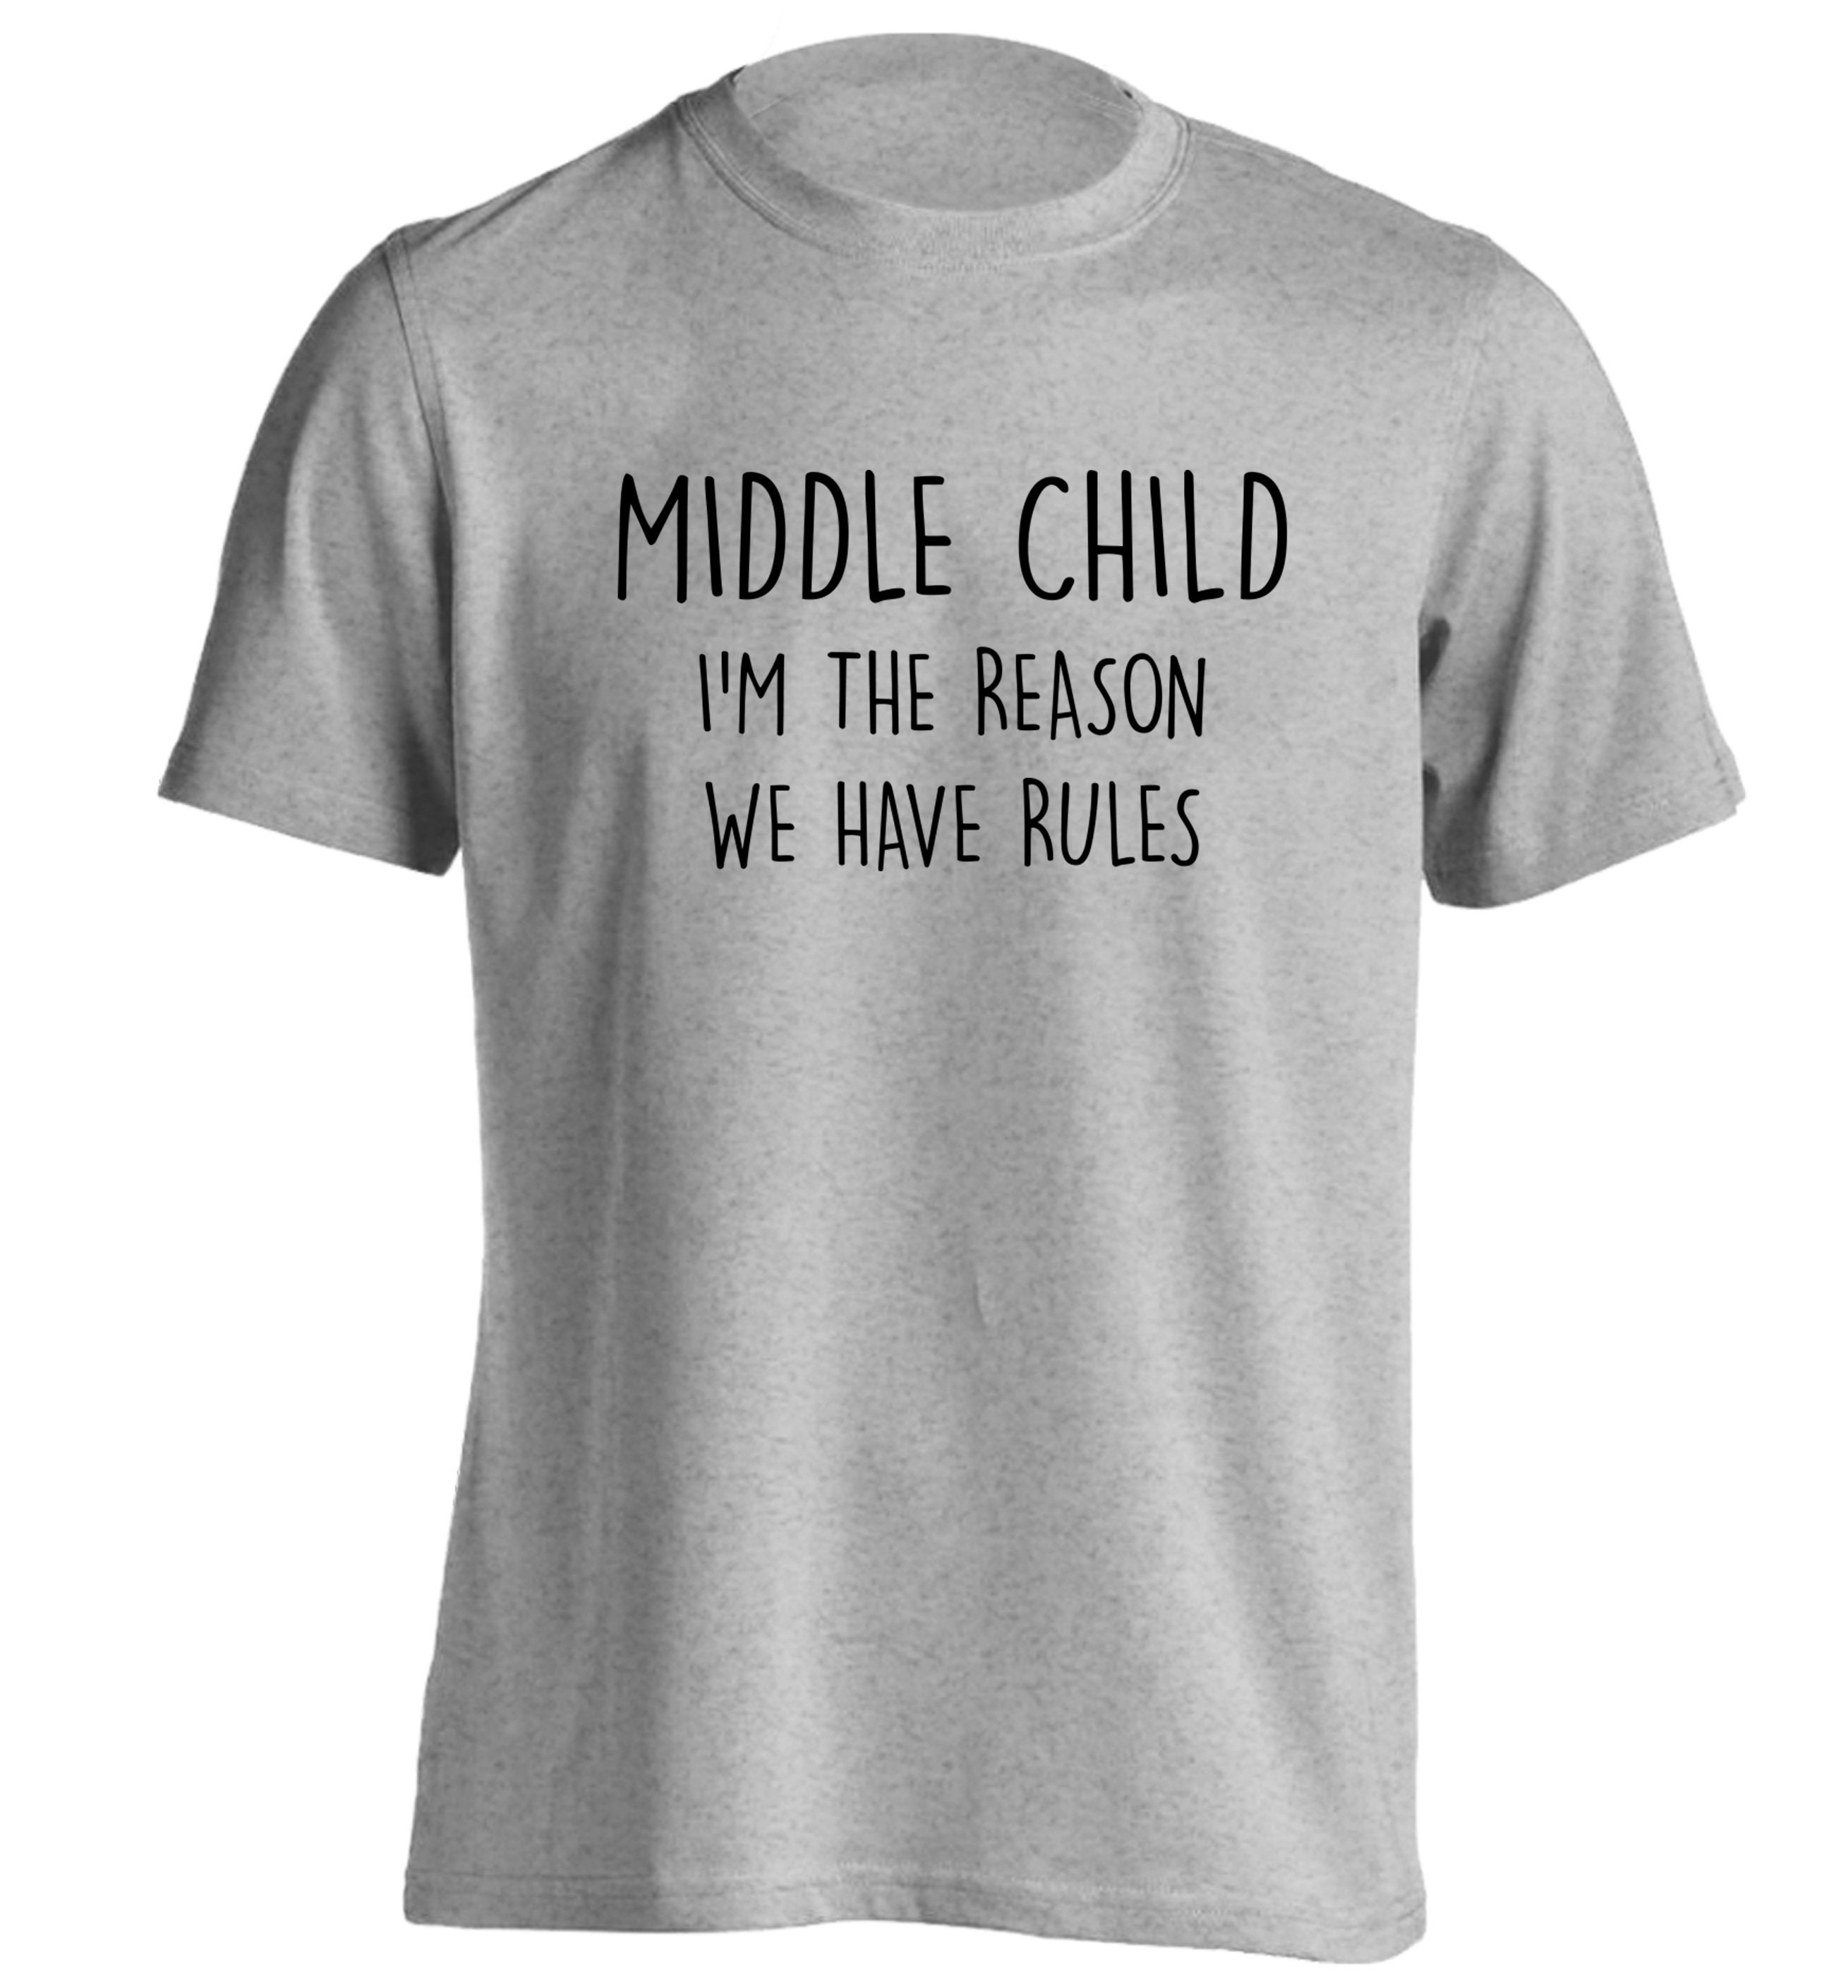 Oldest child / middle child / youngest child t-shirt matching | Etsy